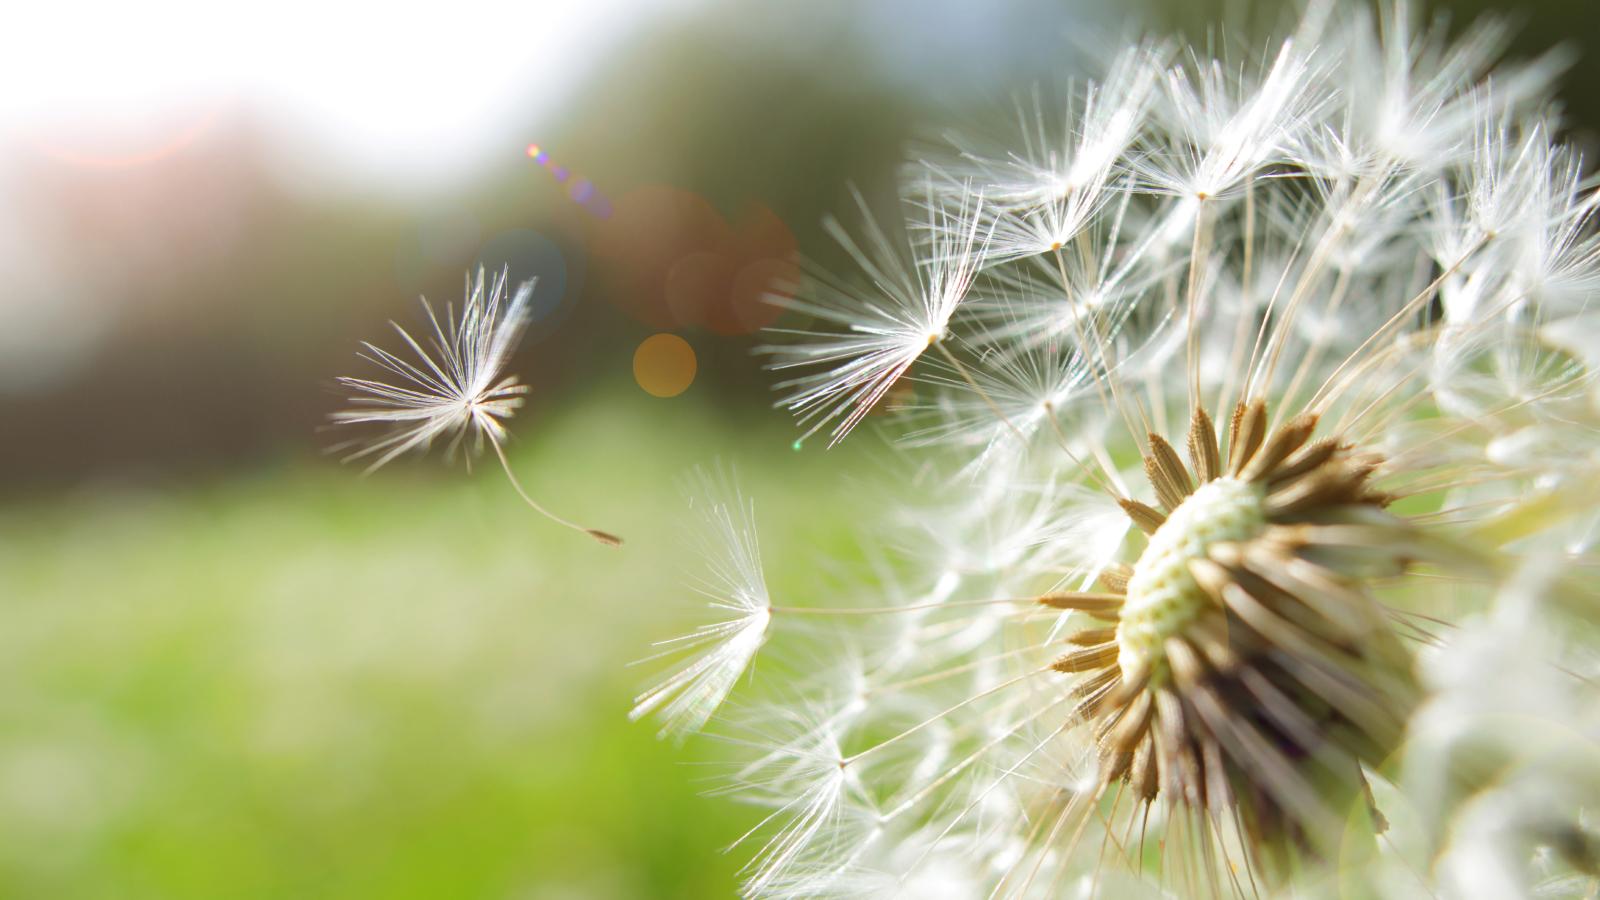 Dandelion specks blow into the wind during spring.